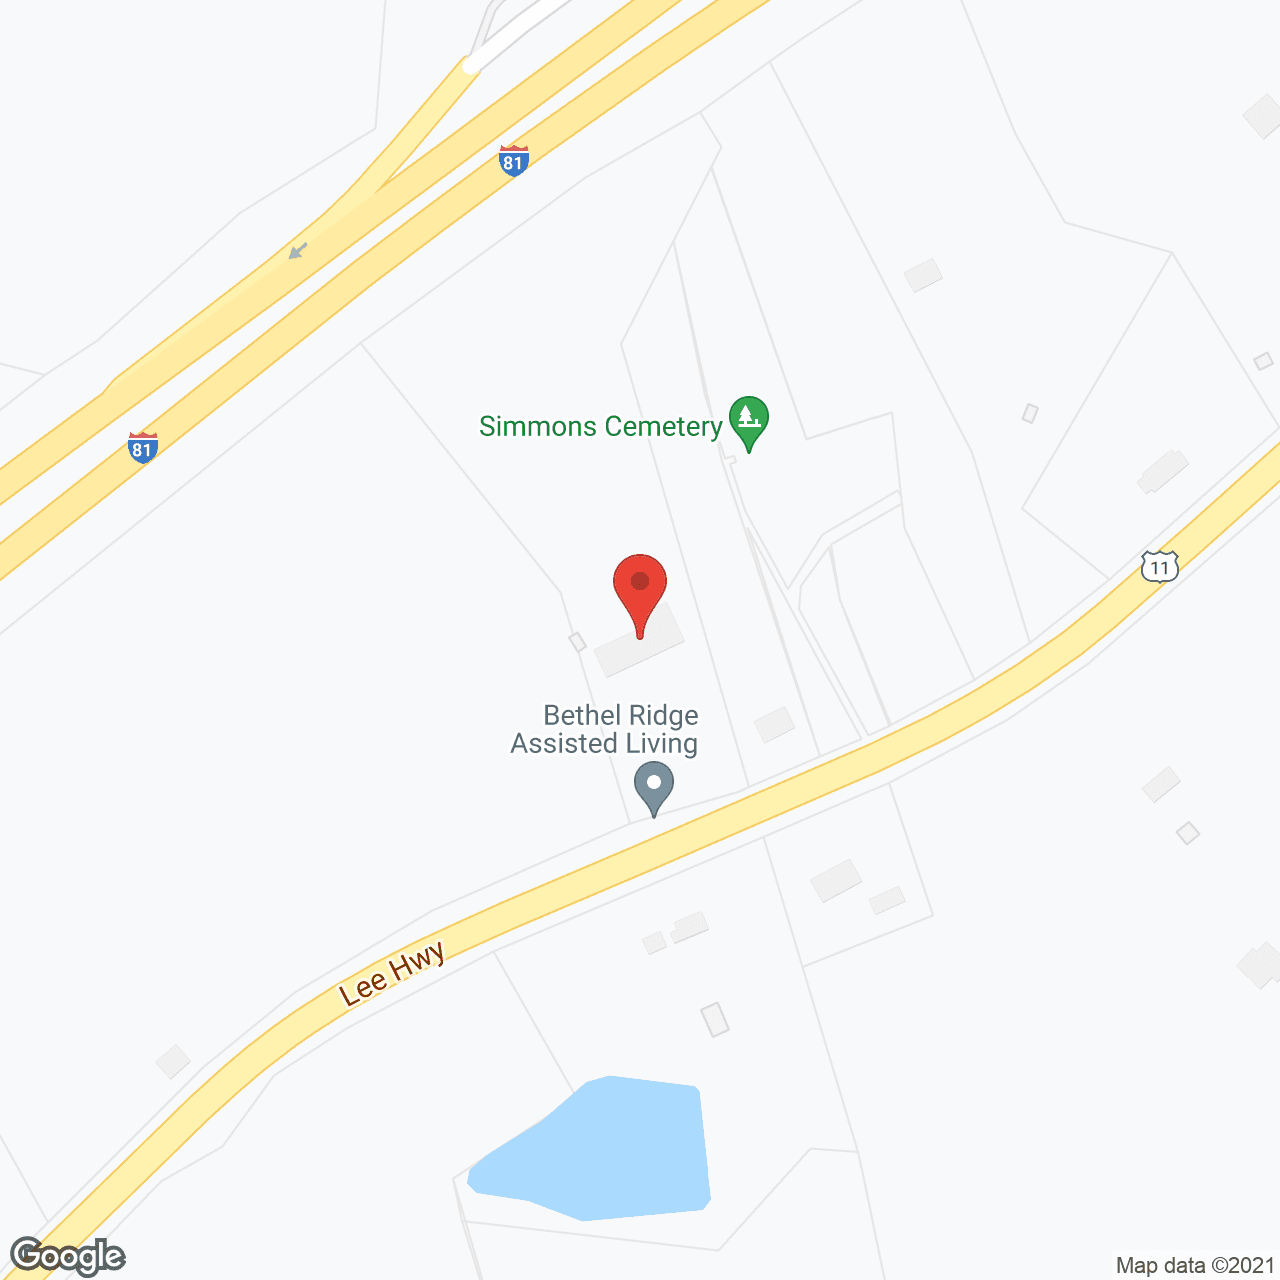 Bethel Ridge Assisted Living in google map